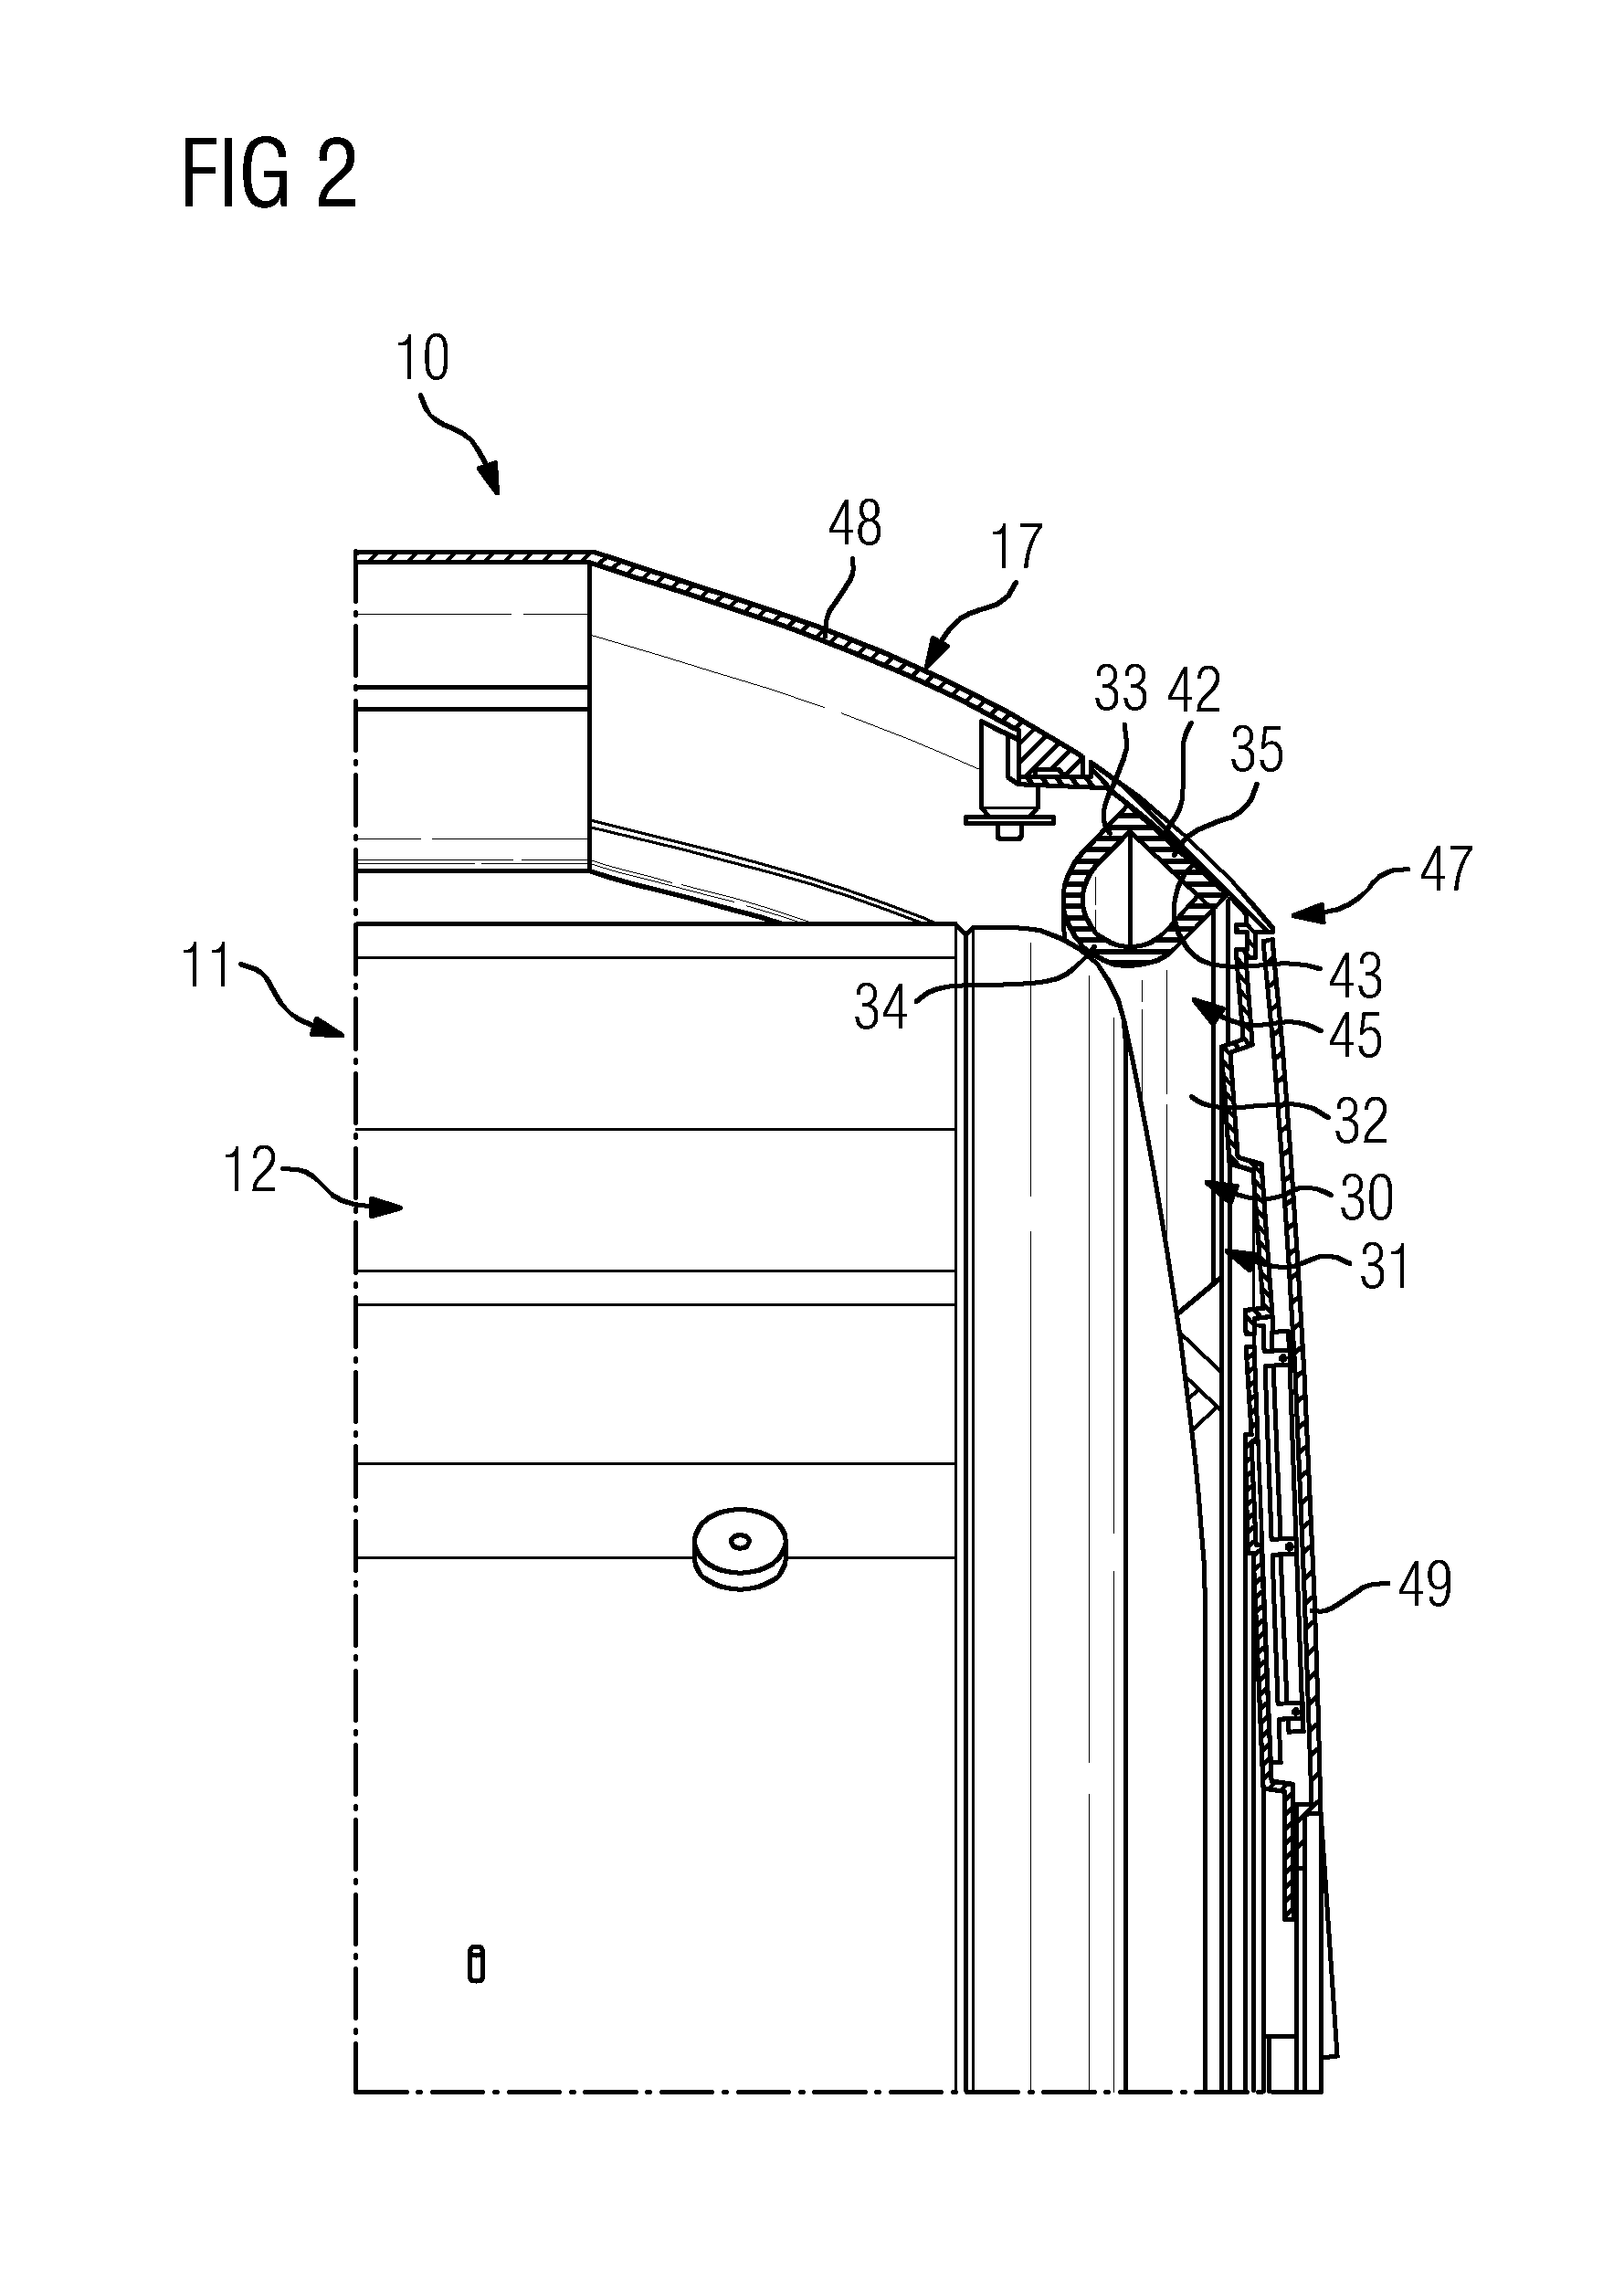 Magnetic resonance apparatus with a noise prevention element and a mold apparatus for producing the noise prevention element